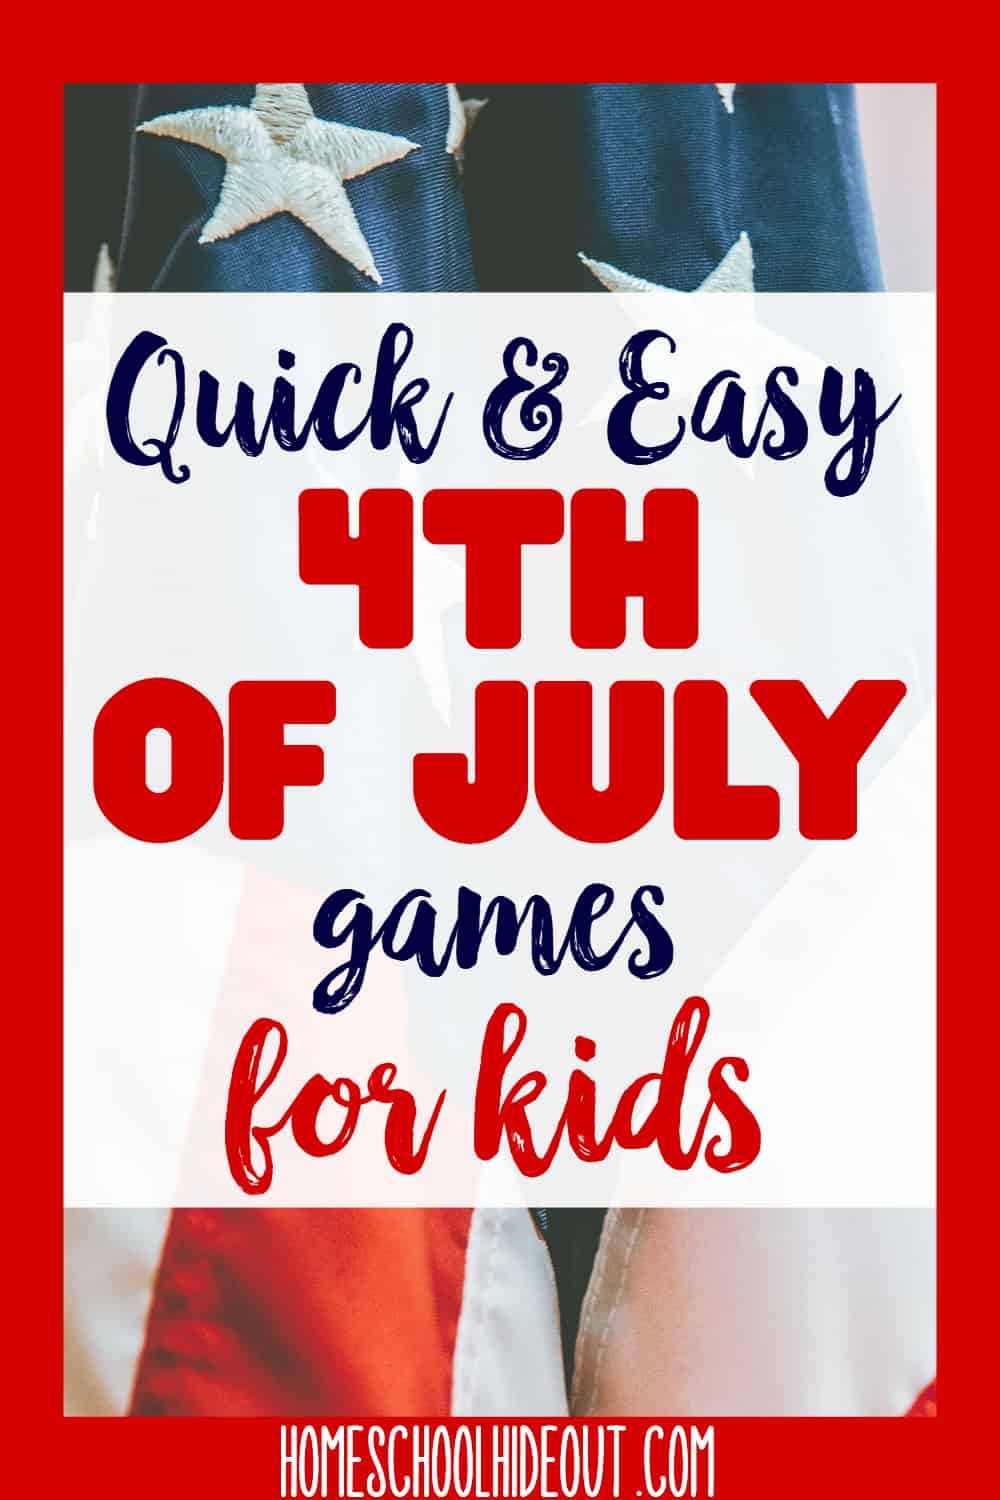 Looking for quick and easy 4th of July games for kids? Check out our "50 Famous American" Charades game for kids! They'll love it and it's a cinch to throw together at the last minute! #4thofjuly #kidsgames #freeprintables